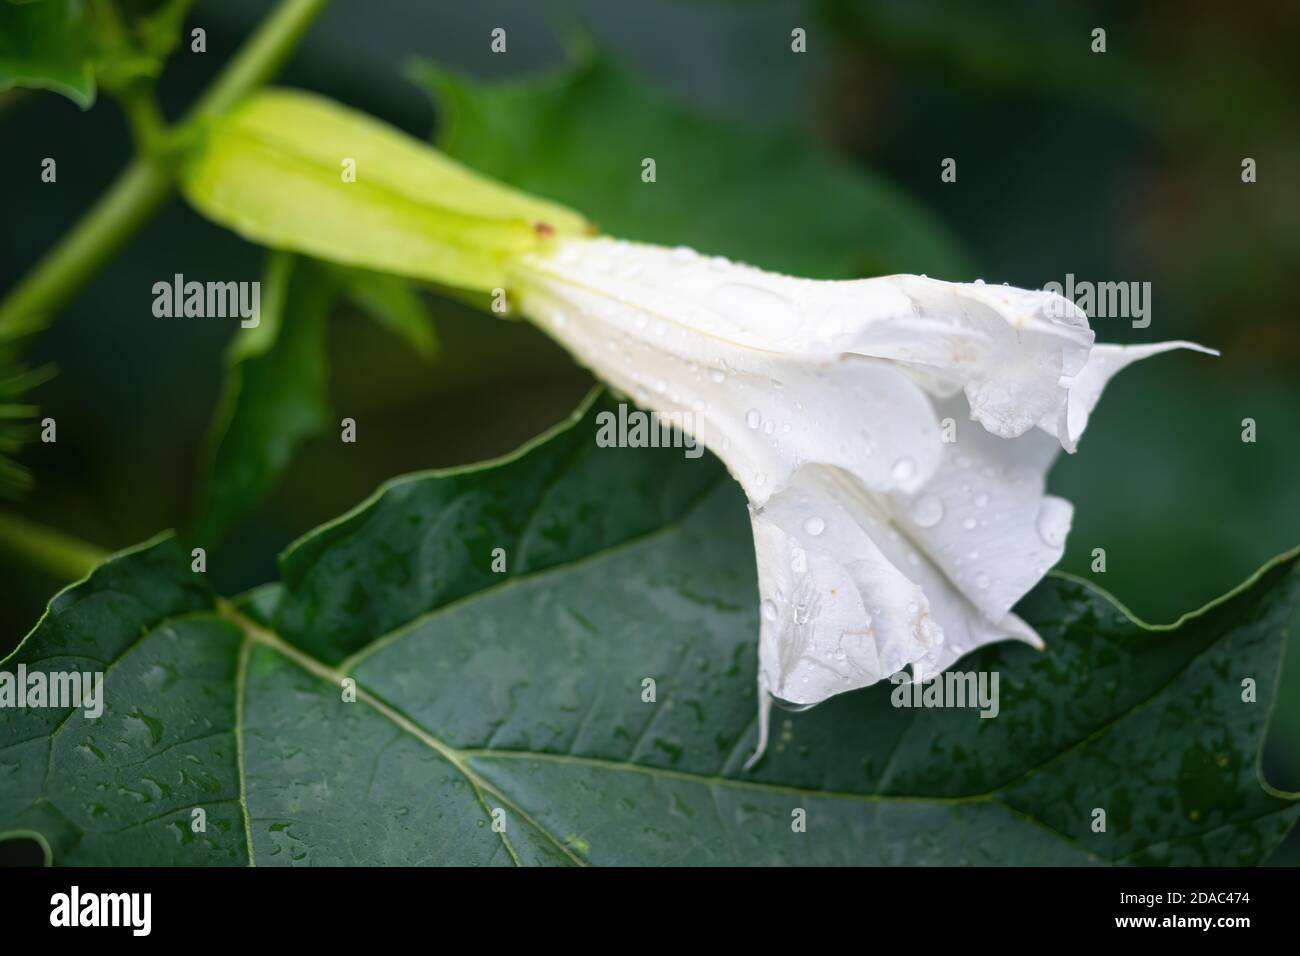 Detail of white trumpet shaped flower of hallucinogen plant Devil's Trumpet (Datura Stramonium), also called Jimsonweed with water drops. Stock Photo